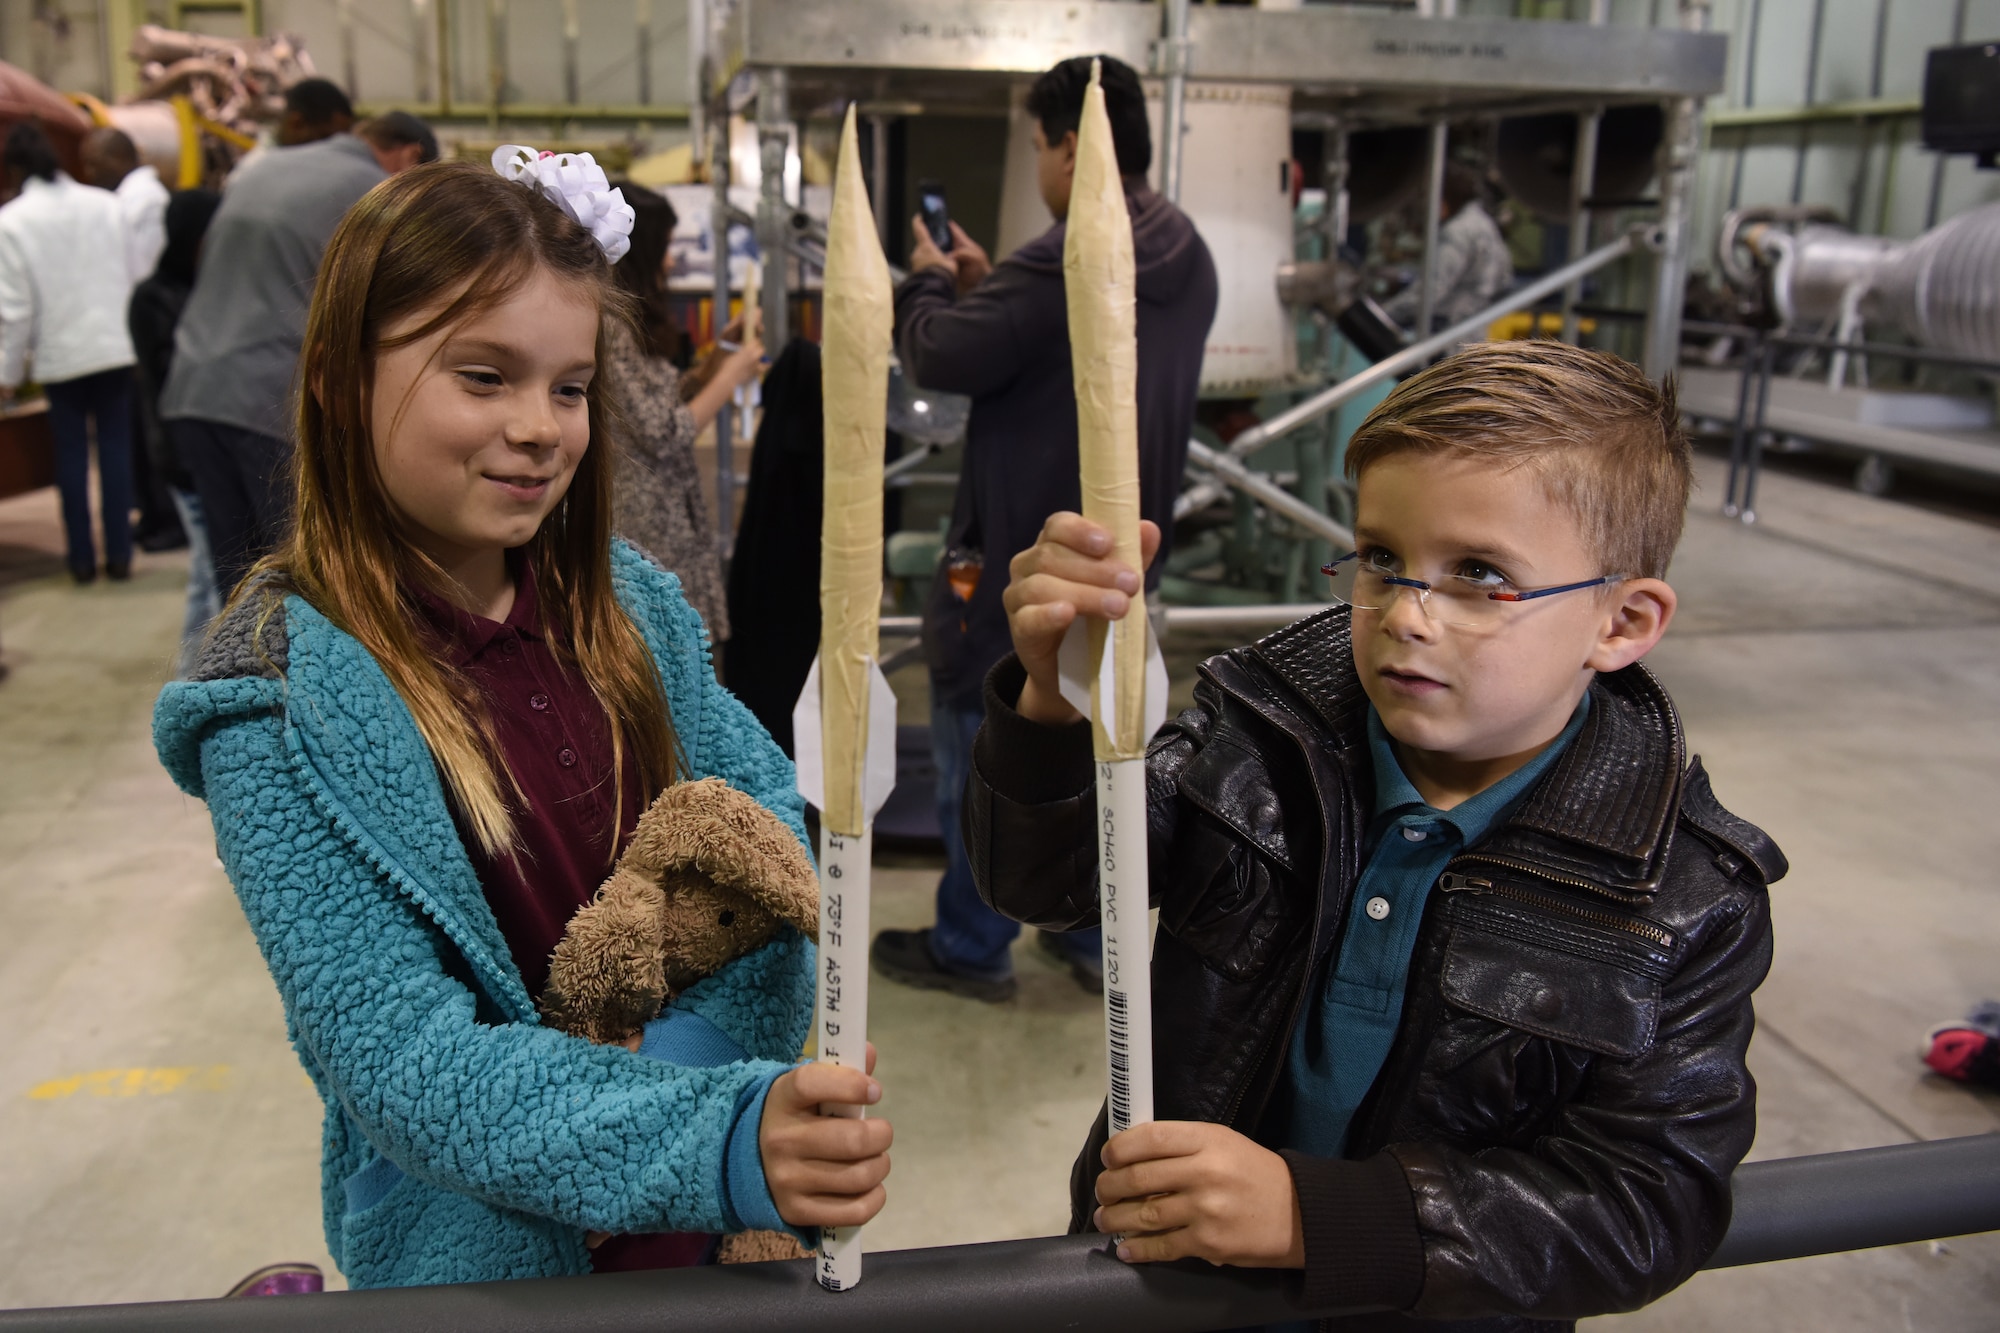 Vandenberg children compare model rockets at the Space and Missile Technology Center during Bring Your Child to Work Day April 26, 2018, Vandenberg Air Force Base, Calif. The event was established to underscore the important role children play in the Armed Forces community. (U.S. Air Force photo by Airman Aubree Milks/Released)